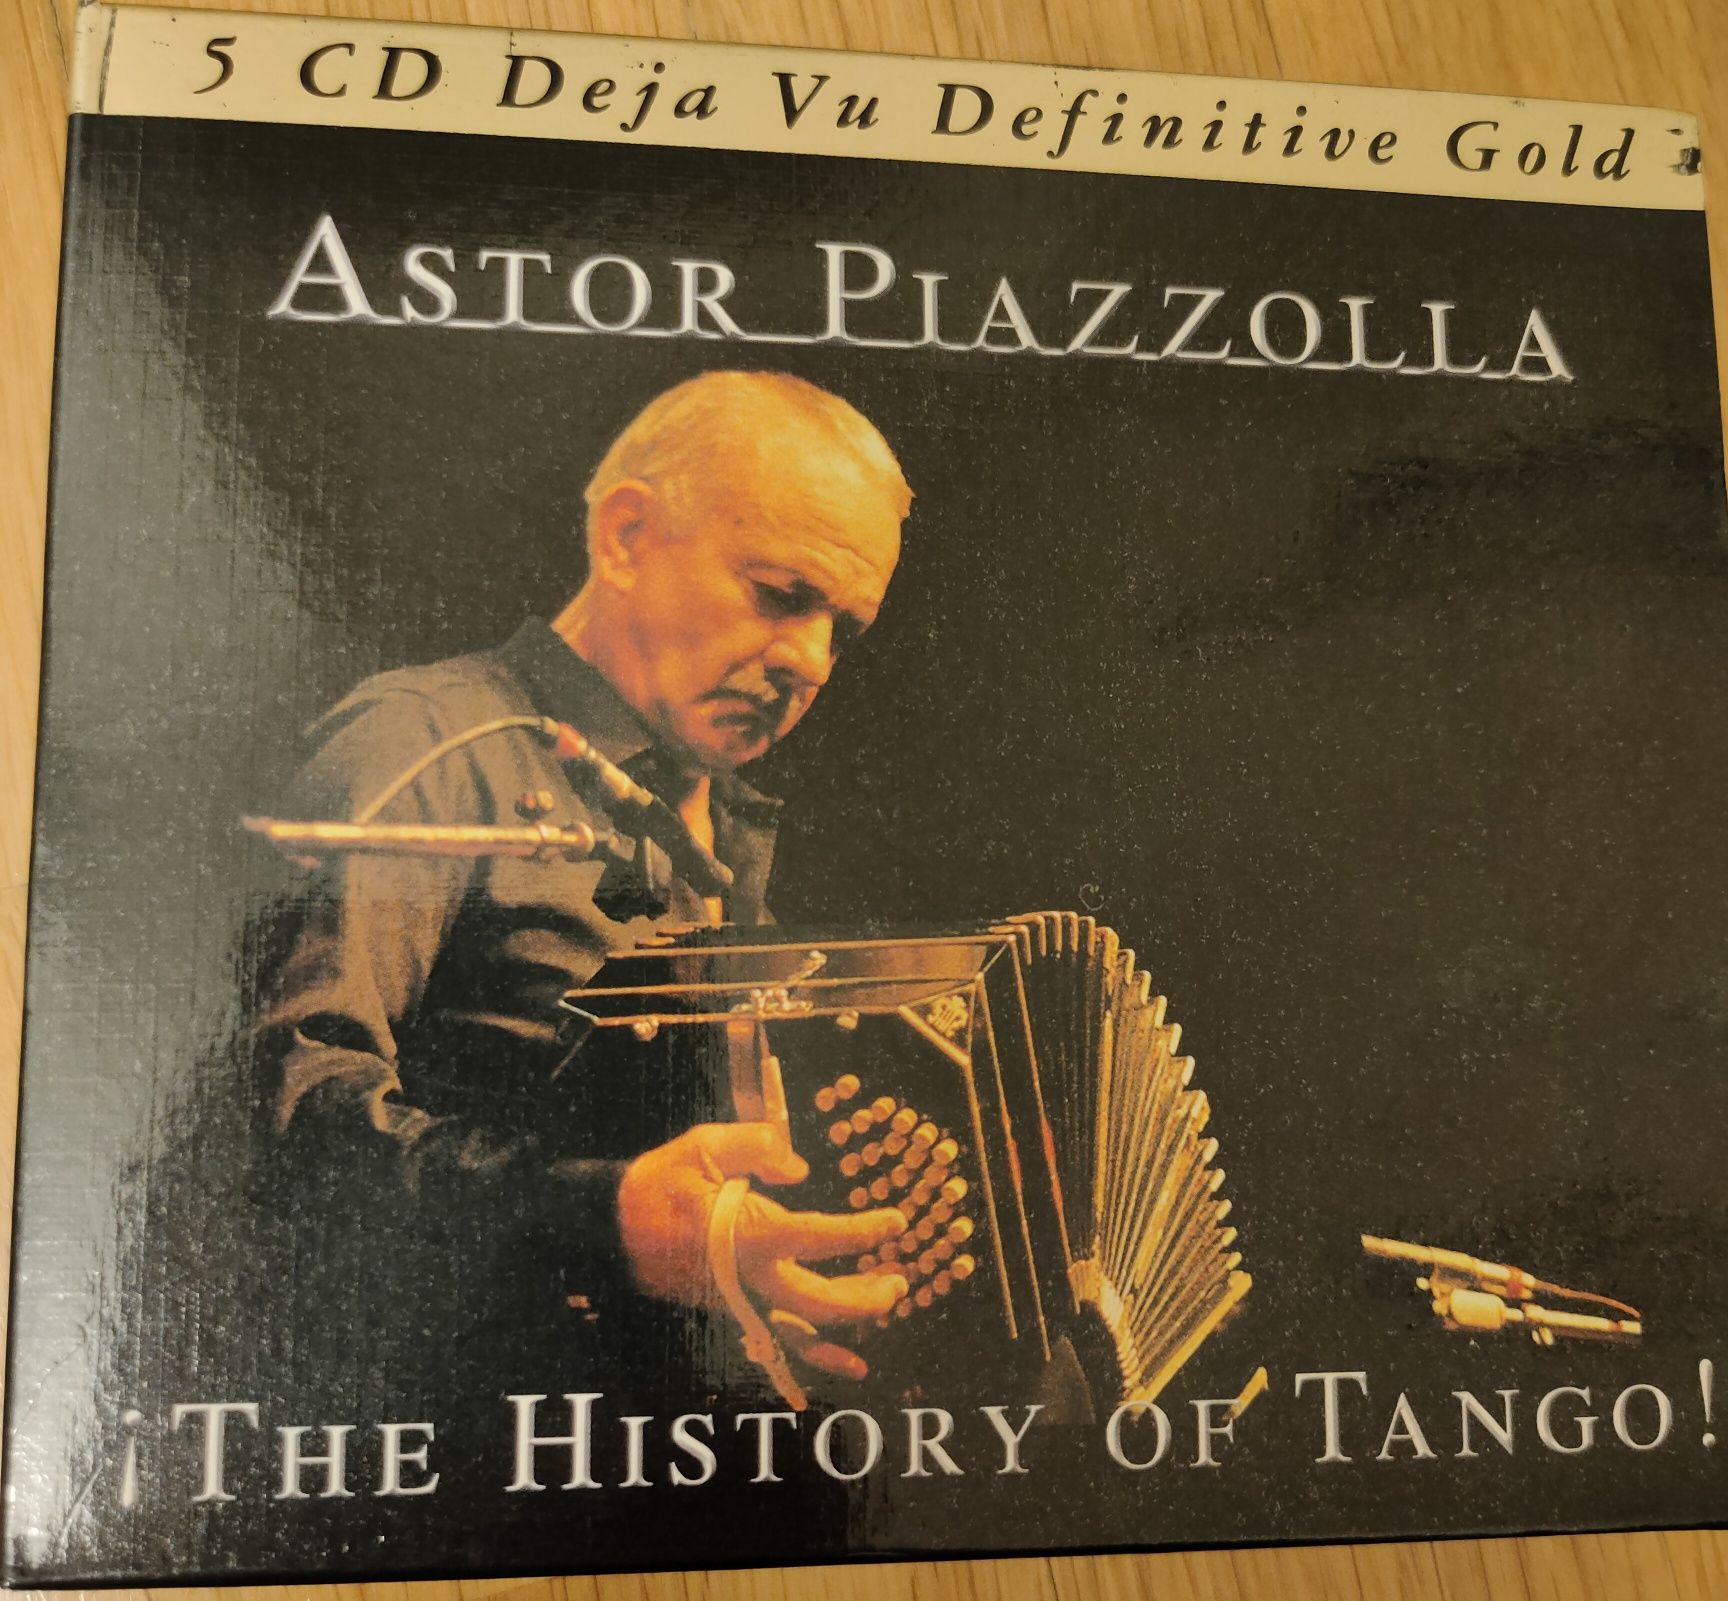 Astor Piazzolla The History of Tango 5 cd